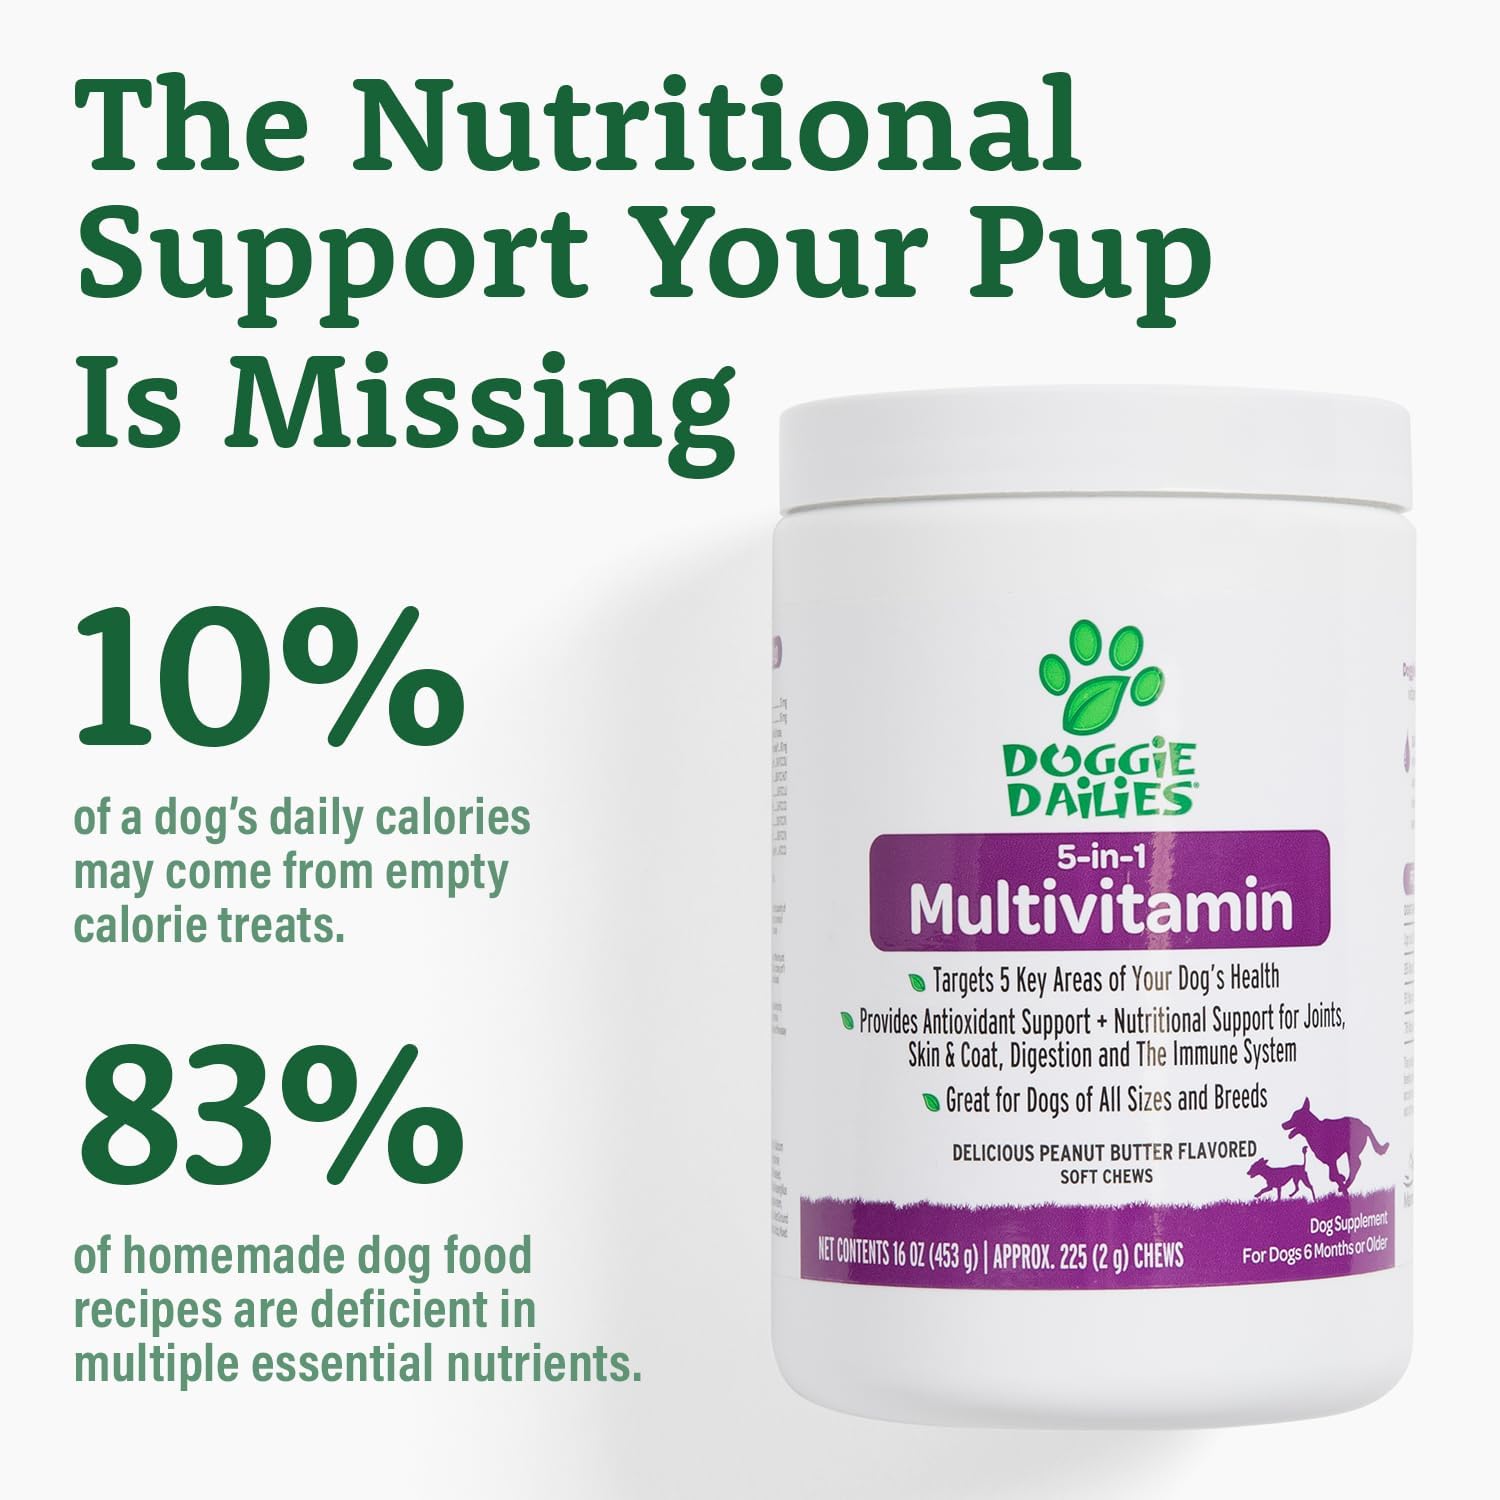 Doggie Dailies 5 in 1 Multivitamin for Dogs, 225 Soft Chews, Dog Multivitamin for Skin and Coat Health, Joint Health, Improved Digestion, Antioxidants, Support a Healthy Immune System : Pet Supplies